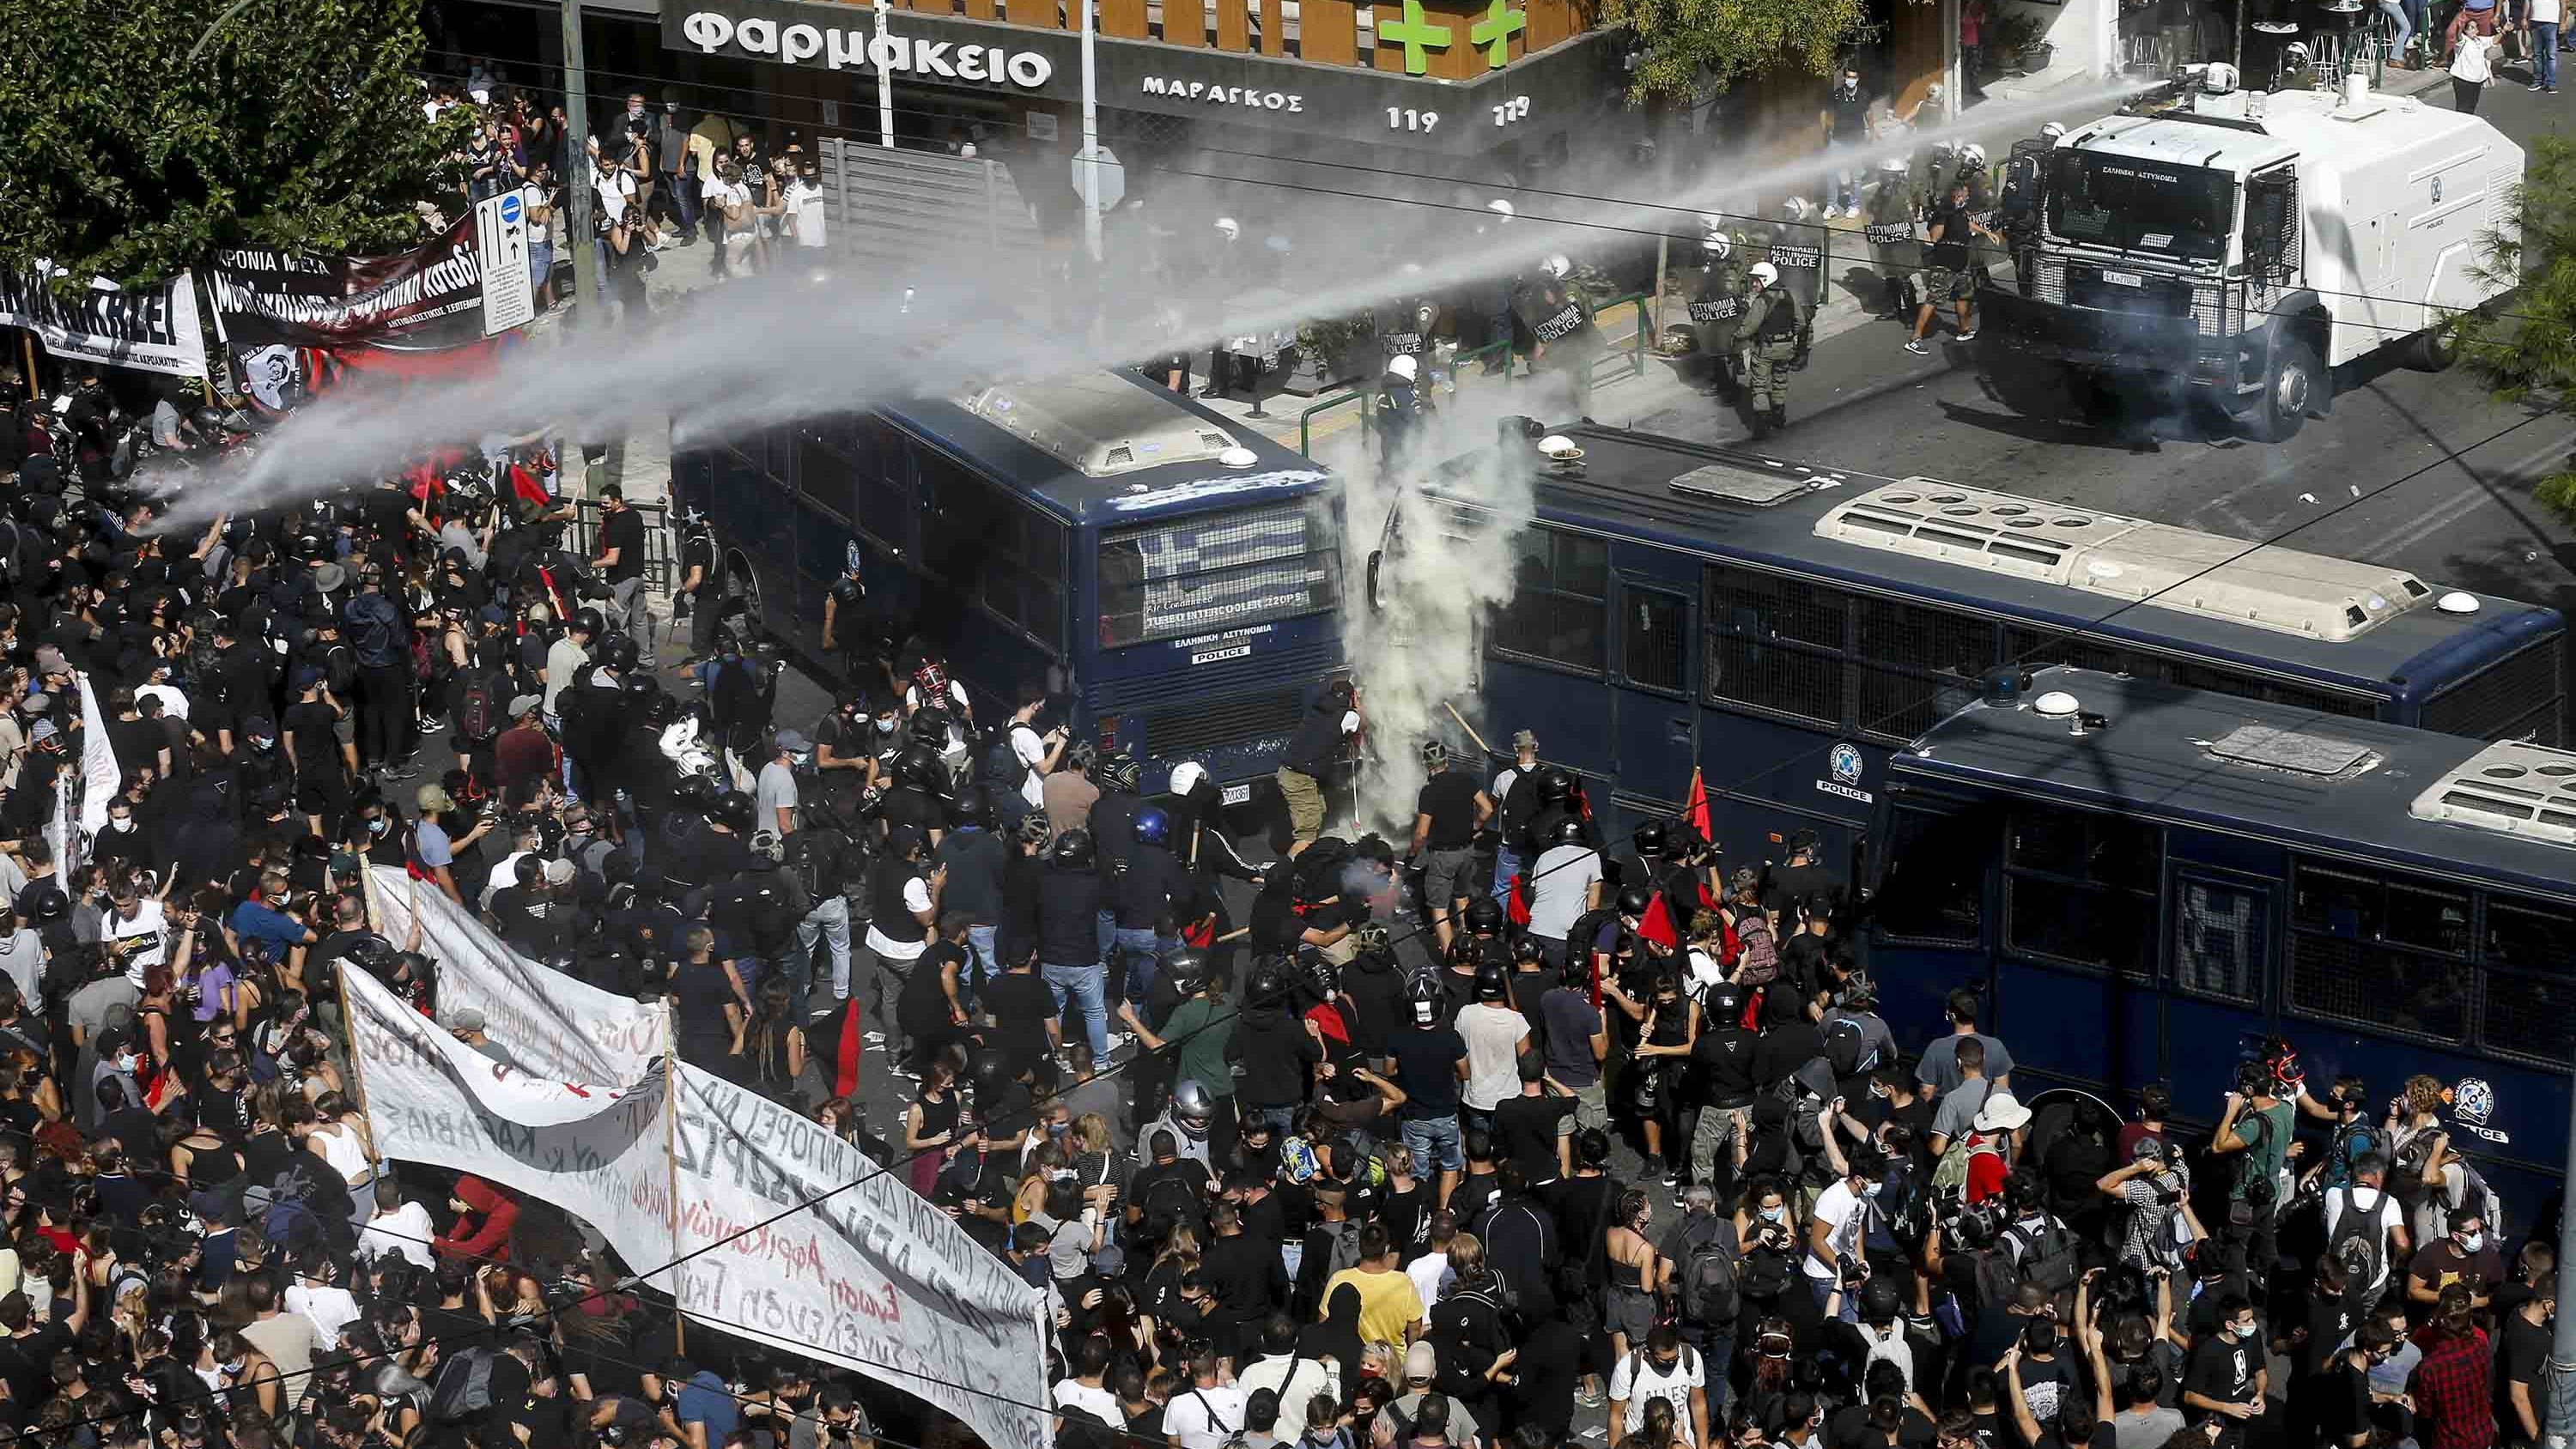 Riot police used water cannon during clashes with anti-fascist protesters after the Golden Dawn leadership was found guilty in Athens on Wednesday.